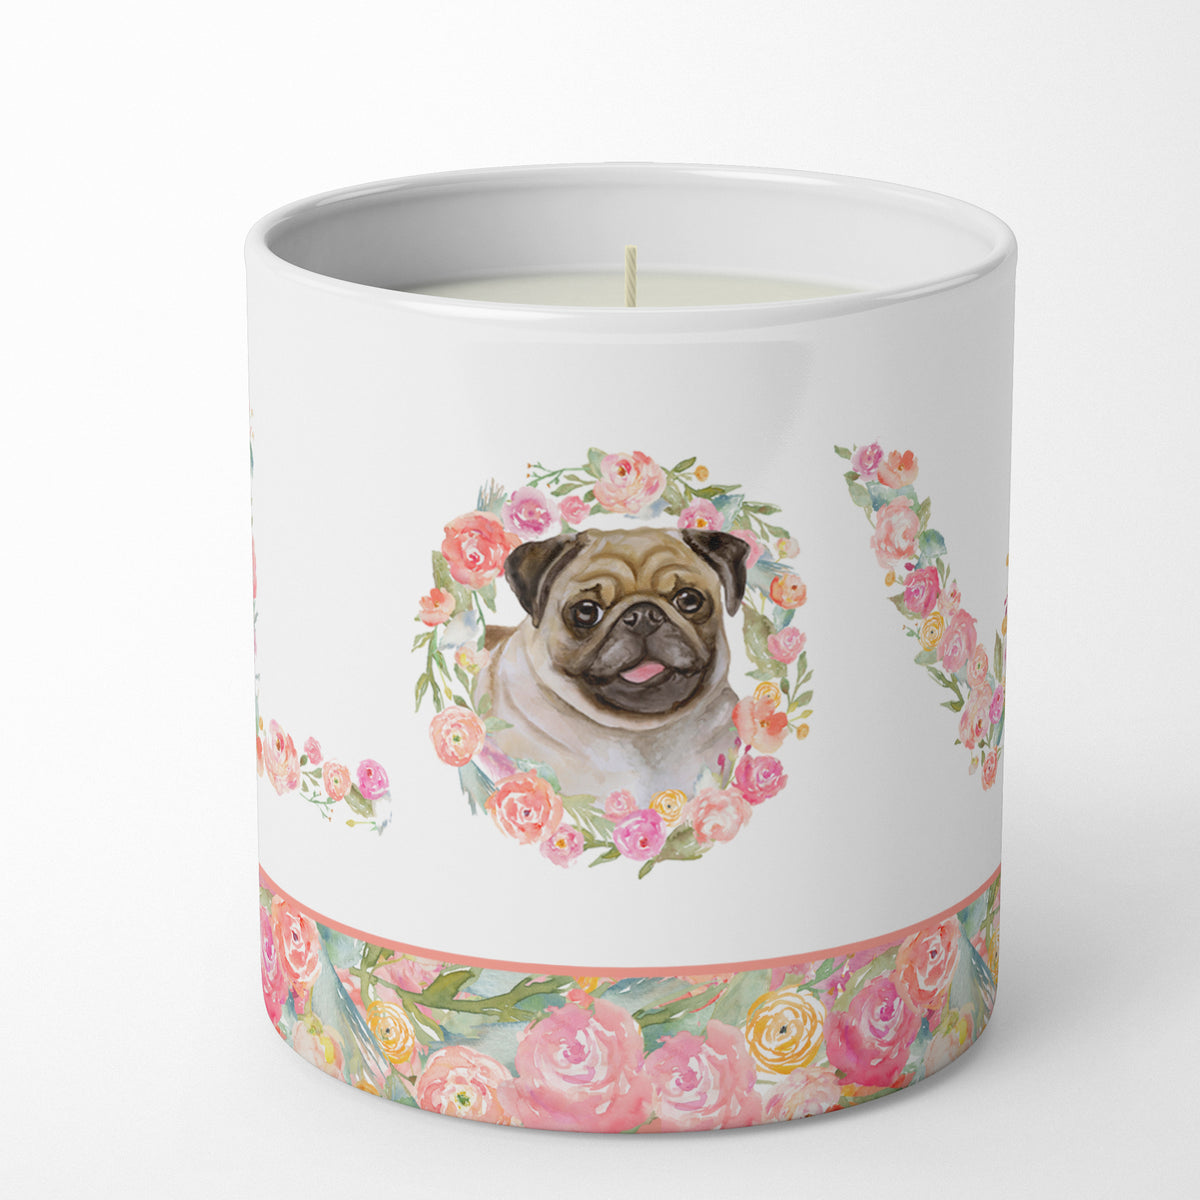 Buy this Pug Love 10 oz Decorative Soy Candle